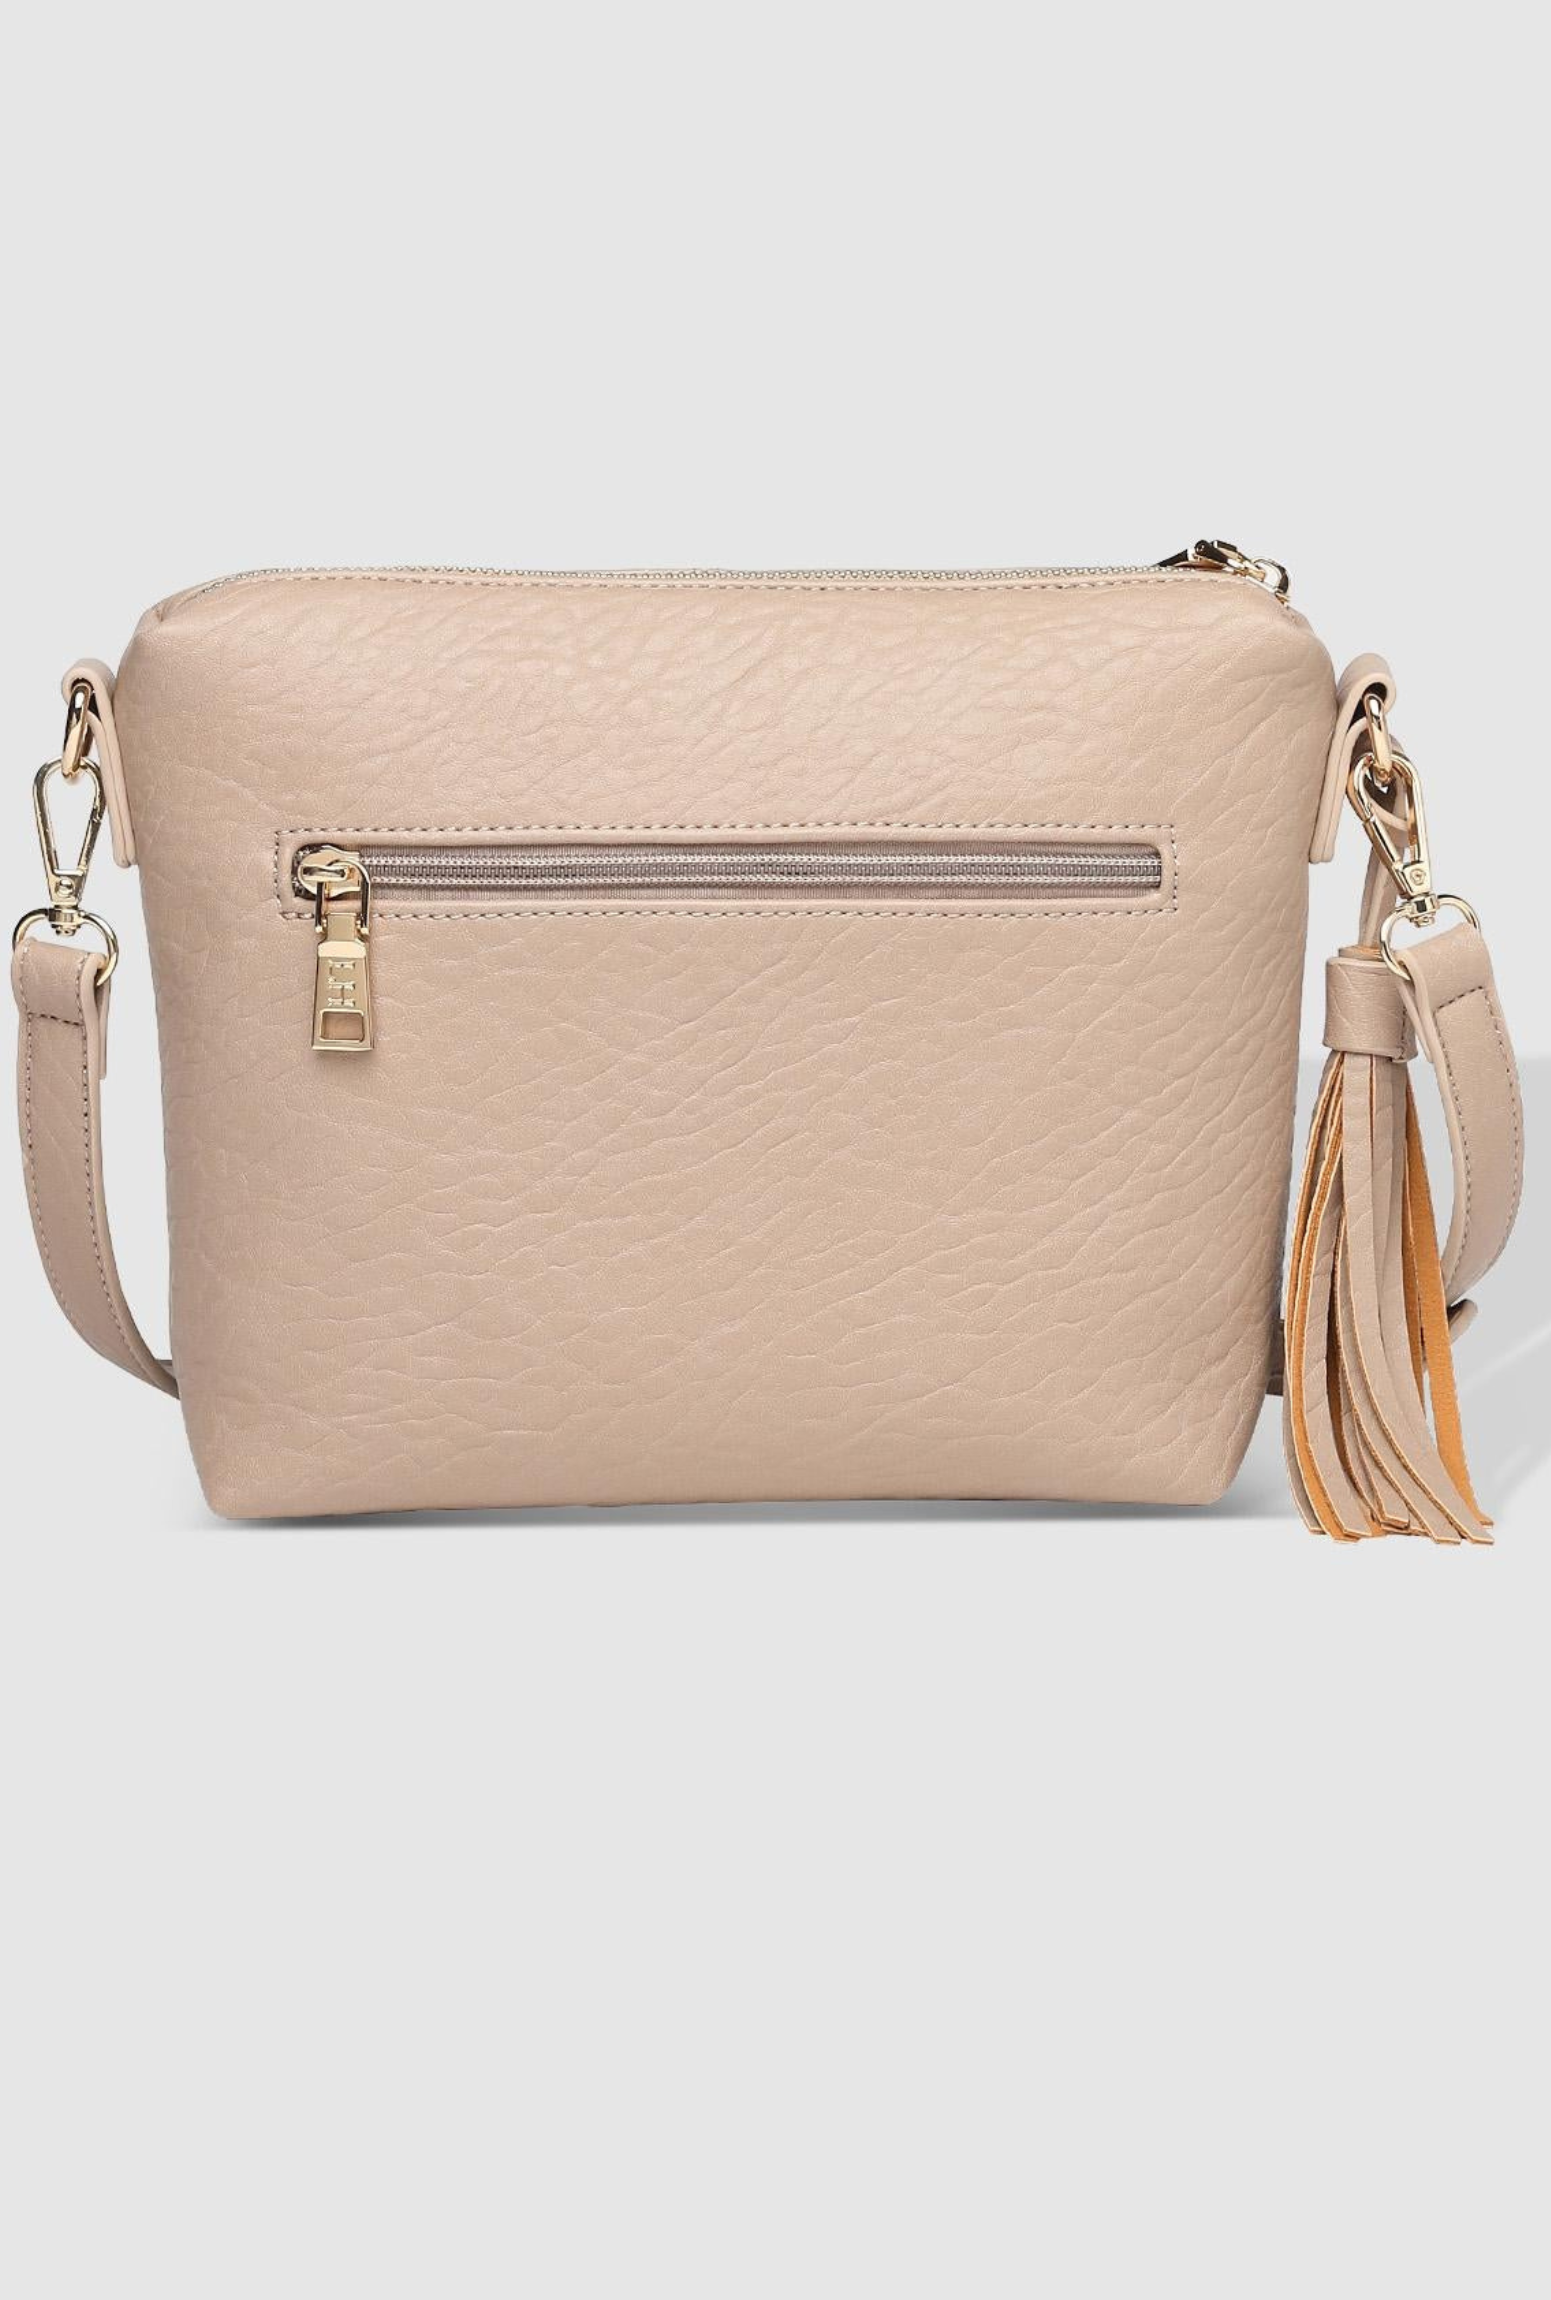 Louenhide Kasey Textured Bag  - Putty